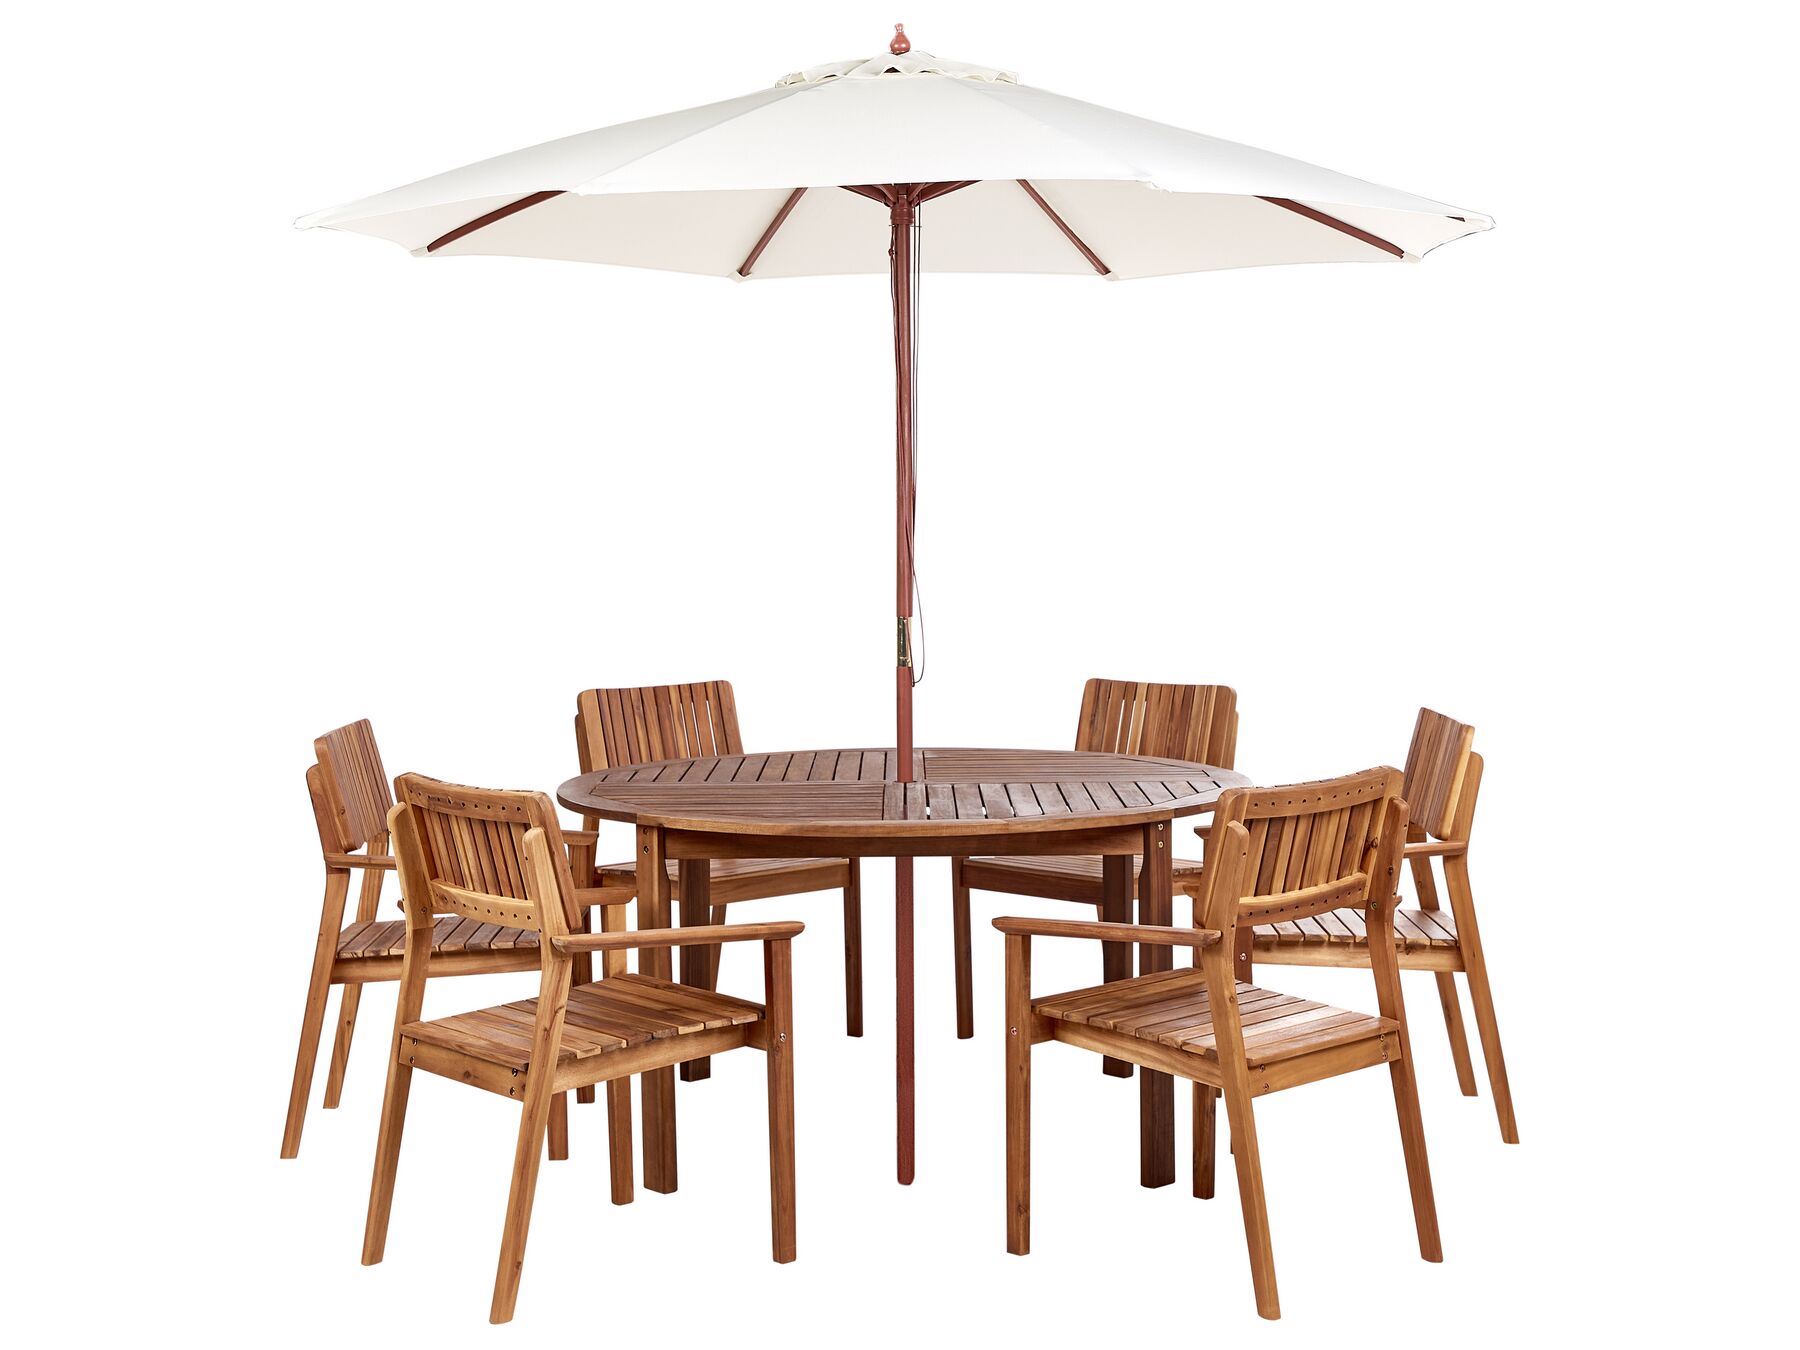 6 Seater Acacia Wood Garden Dining Set AGELLO/TOLVE with Parasol (12 Options)_924316